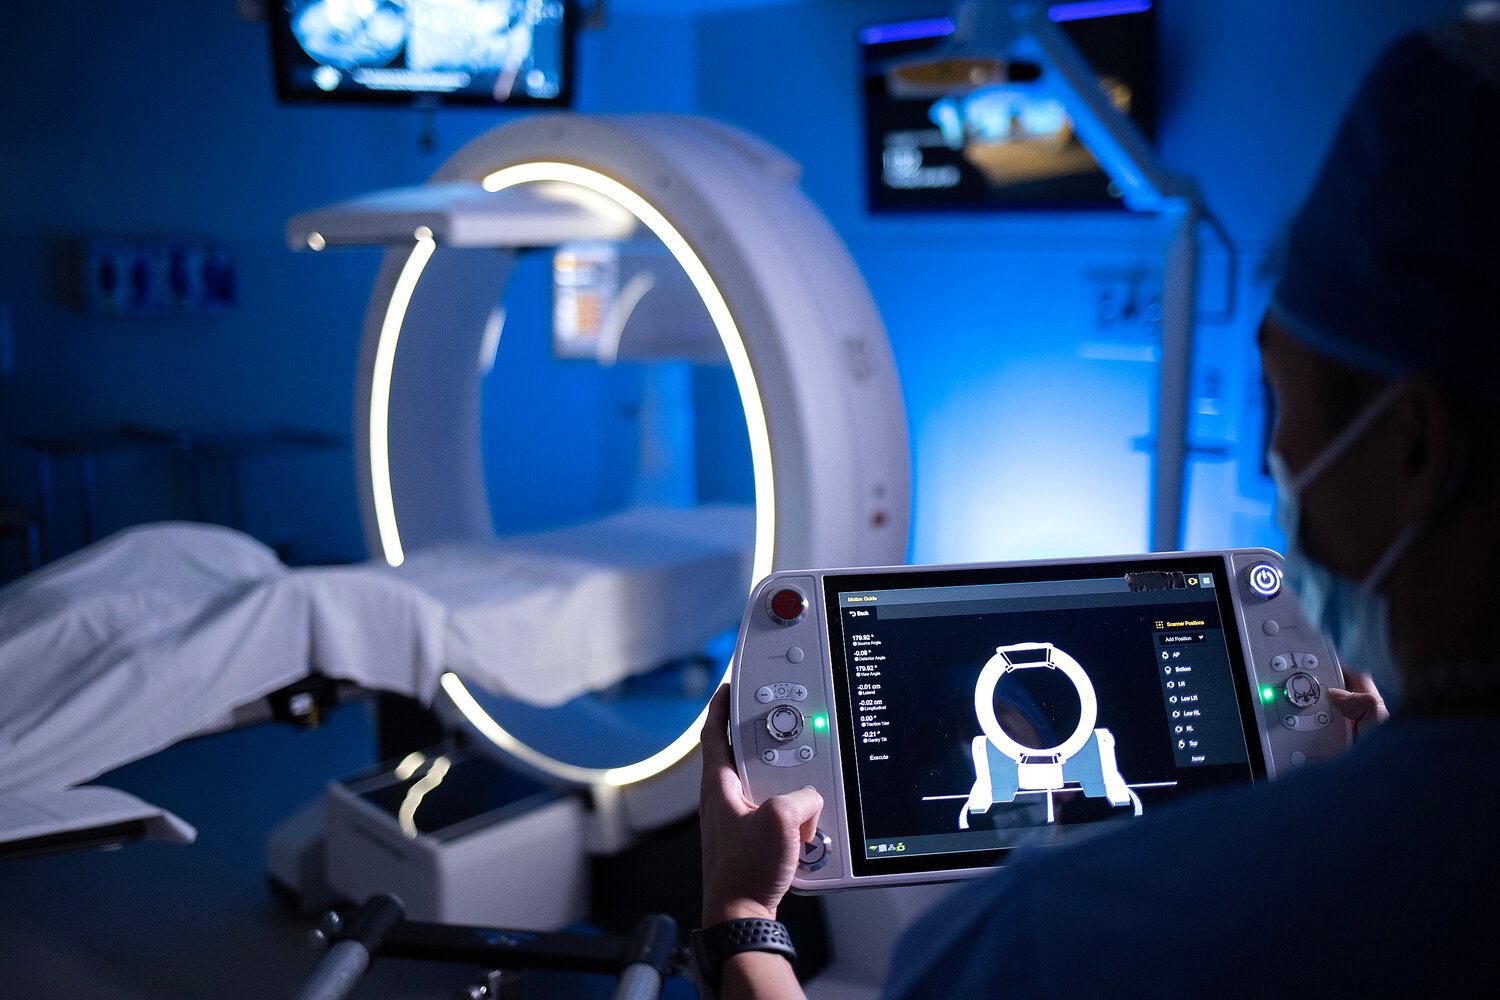 Loop-X includes a circular imaging system that robotically moves around the patient for live, targeted 3D and 2D cone-beam computed tomography (CT) images.